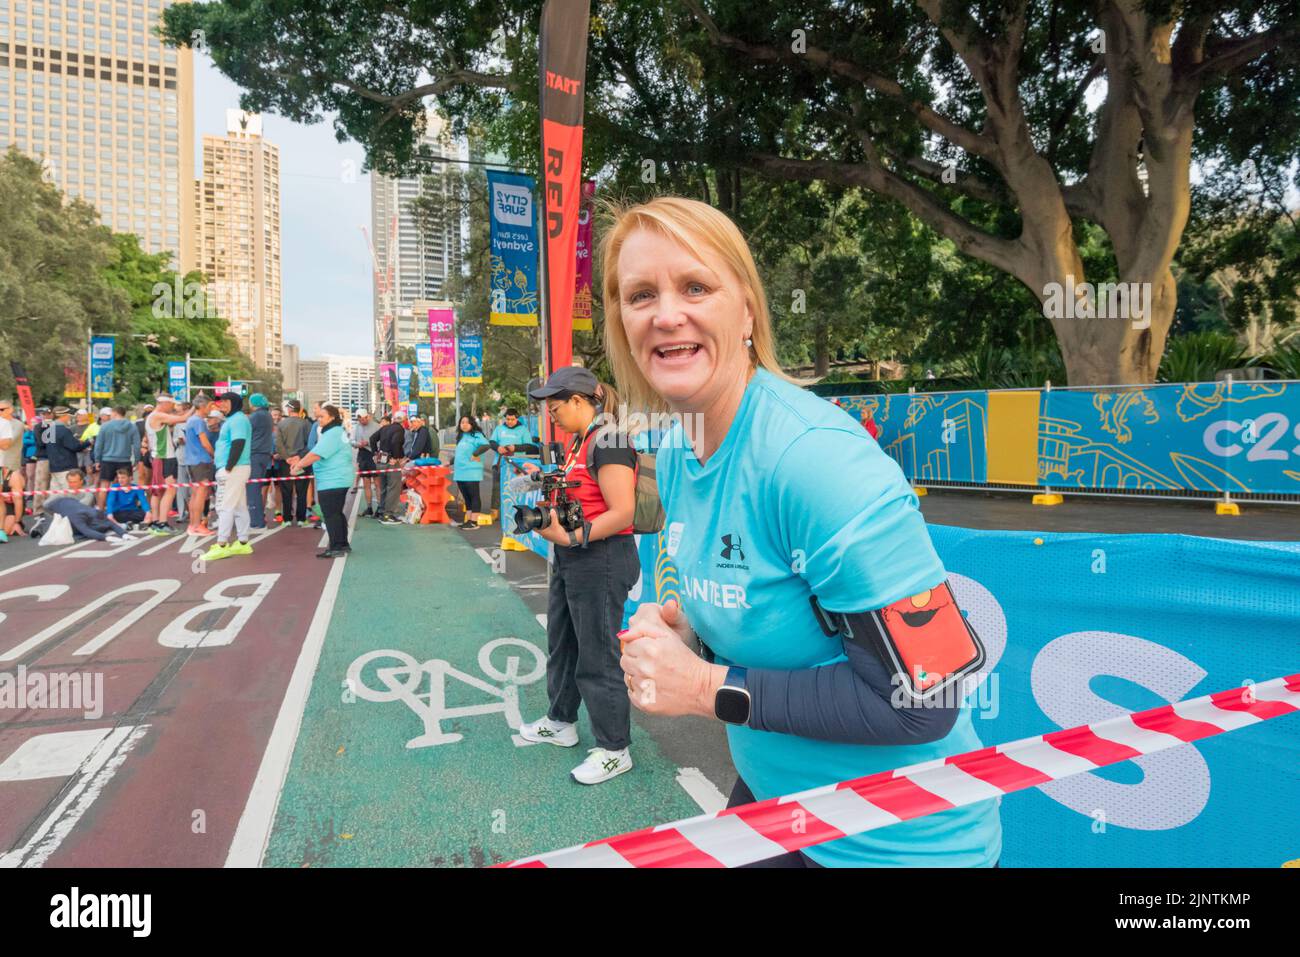 Sydney, Australia, 14 August 2022: Some 60,000+ people are taking part in the 50th City2Surf race in Sydney, the first since 2019 after cancellations in 2020 and 2021 due to Covid-19 restrictions. In the background of every race are volunteers who help the event run smoothly. Pictured, Jodie Chilvers, a Senior Girl Guides leader who, with other Guides, has for many years collected discarded runner’s pre-start outer-clothing that is later donated to charities. Credit: Stephen Dwyer / Alamy Live News Stock Photo